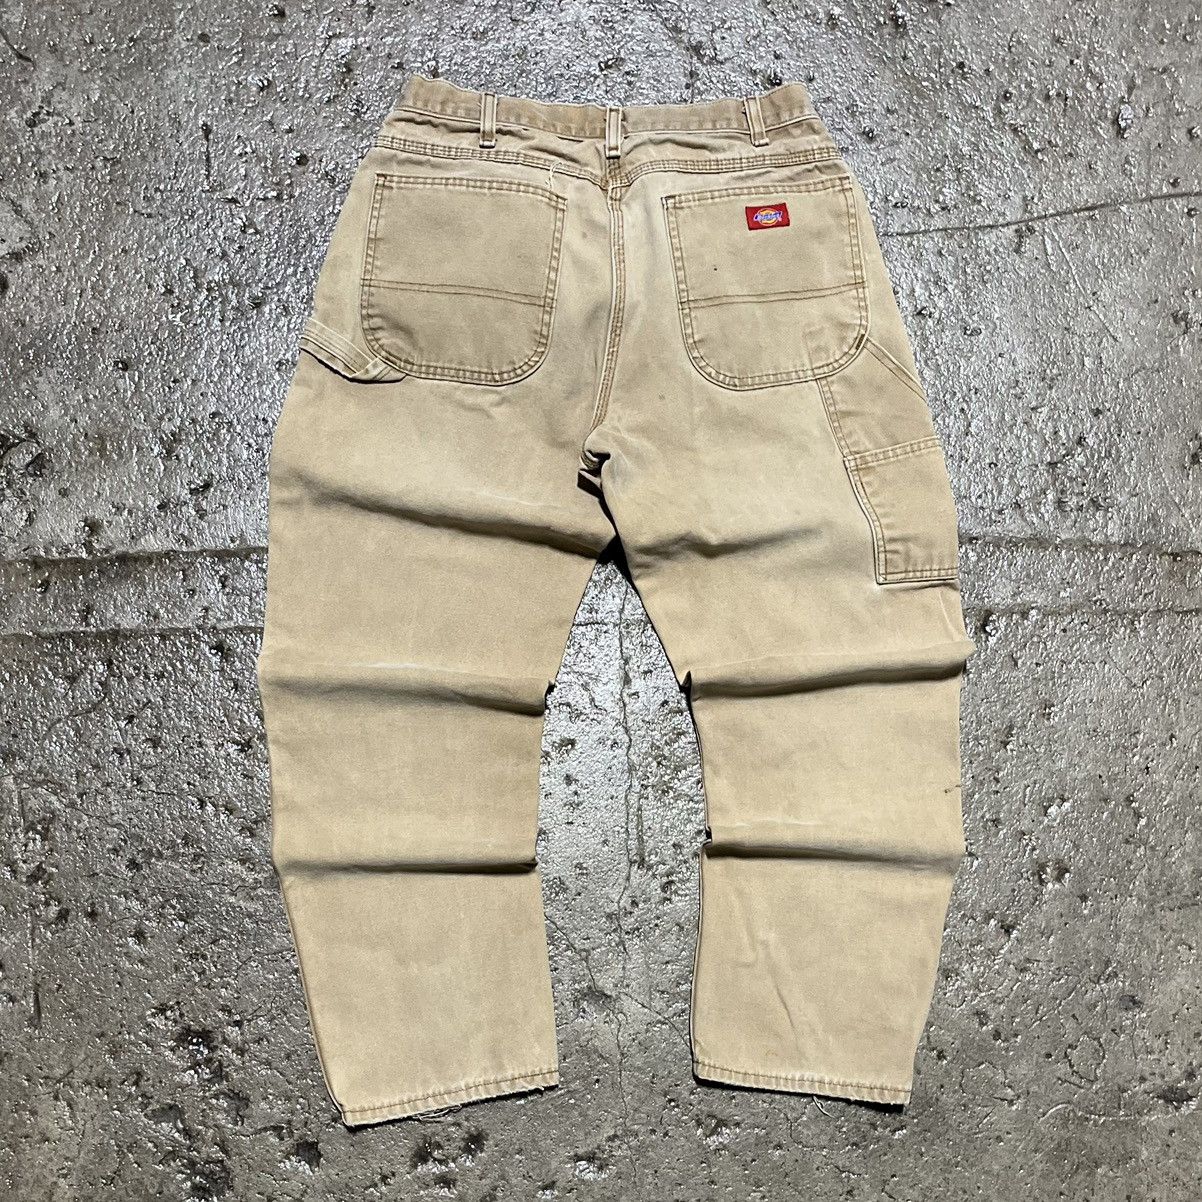 Pre-owned Carhartt X Vintage Crazy Carhartt Style Dickies Faded Carpenter Workwear Jeans In Tan